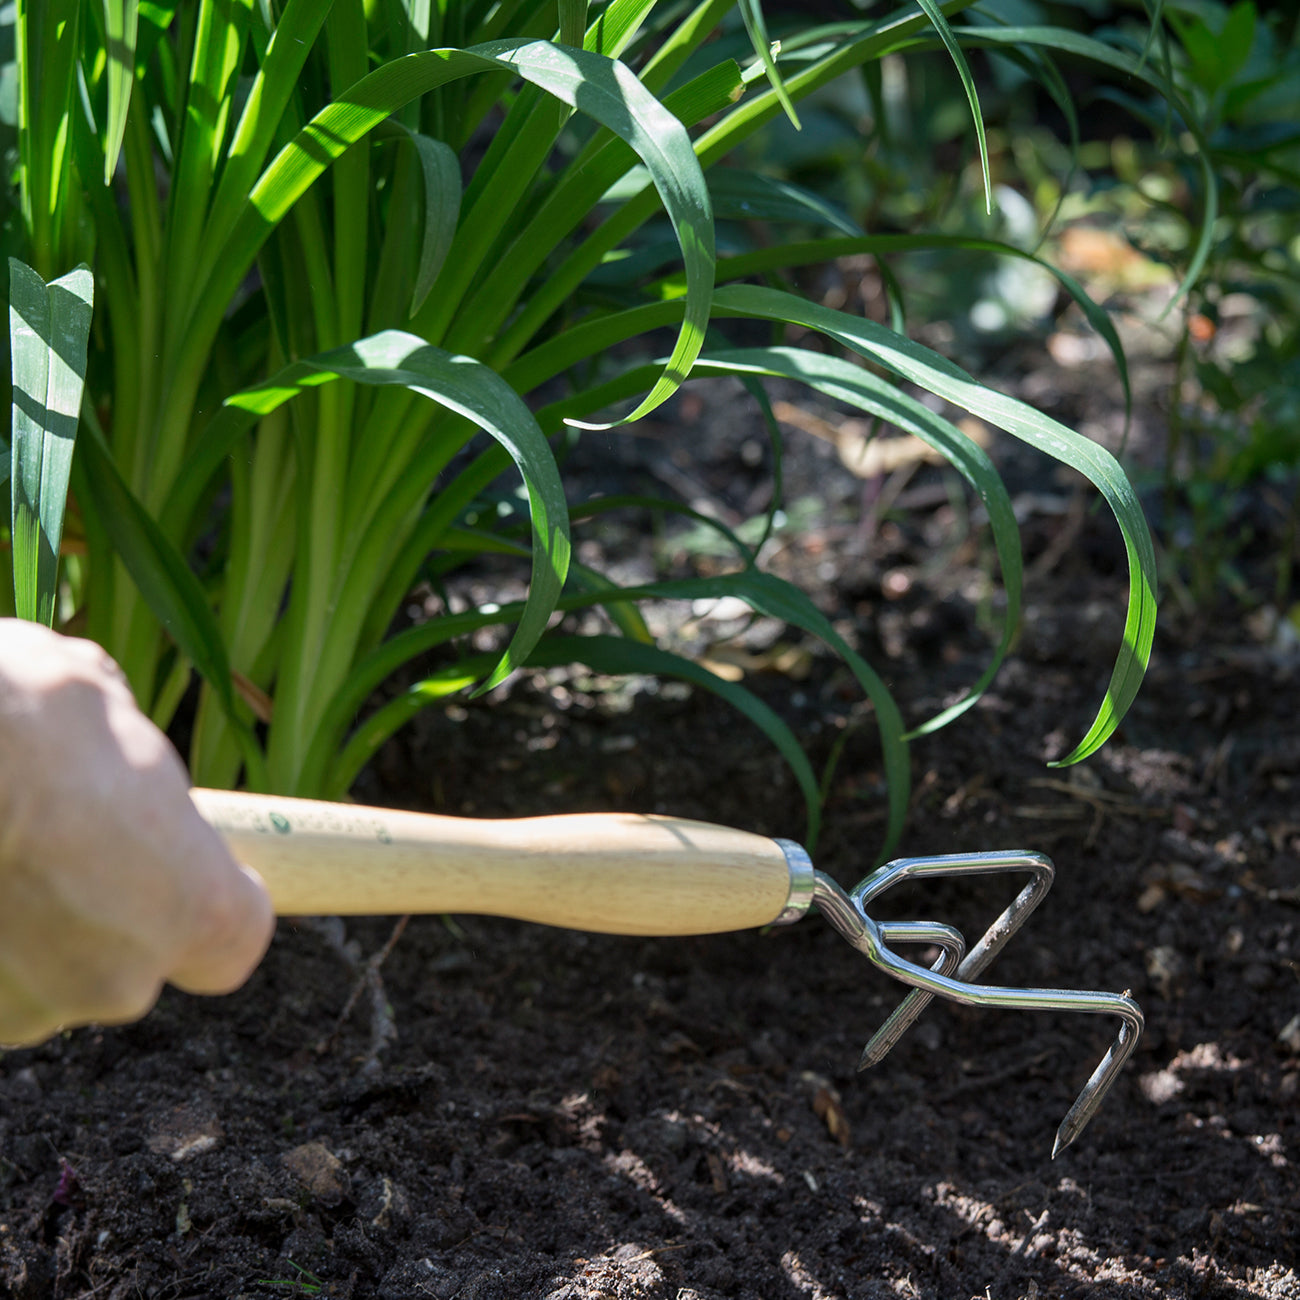 This beautiful stainless steel mid handled claw cultivator offers extra reach, making it easy to garden at the back of borders.